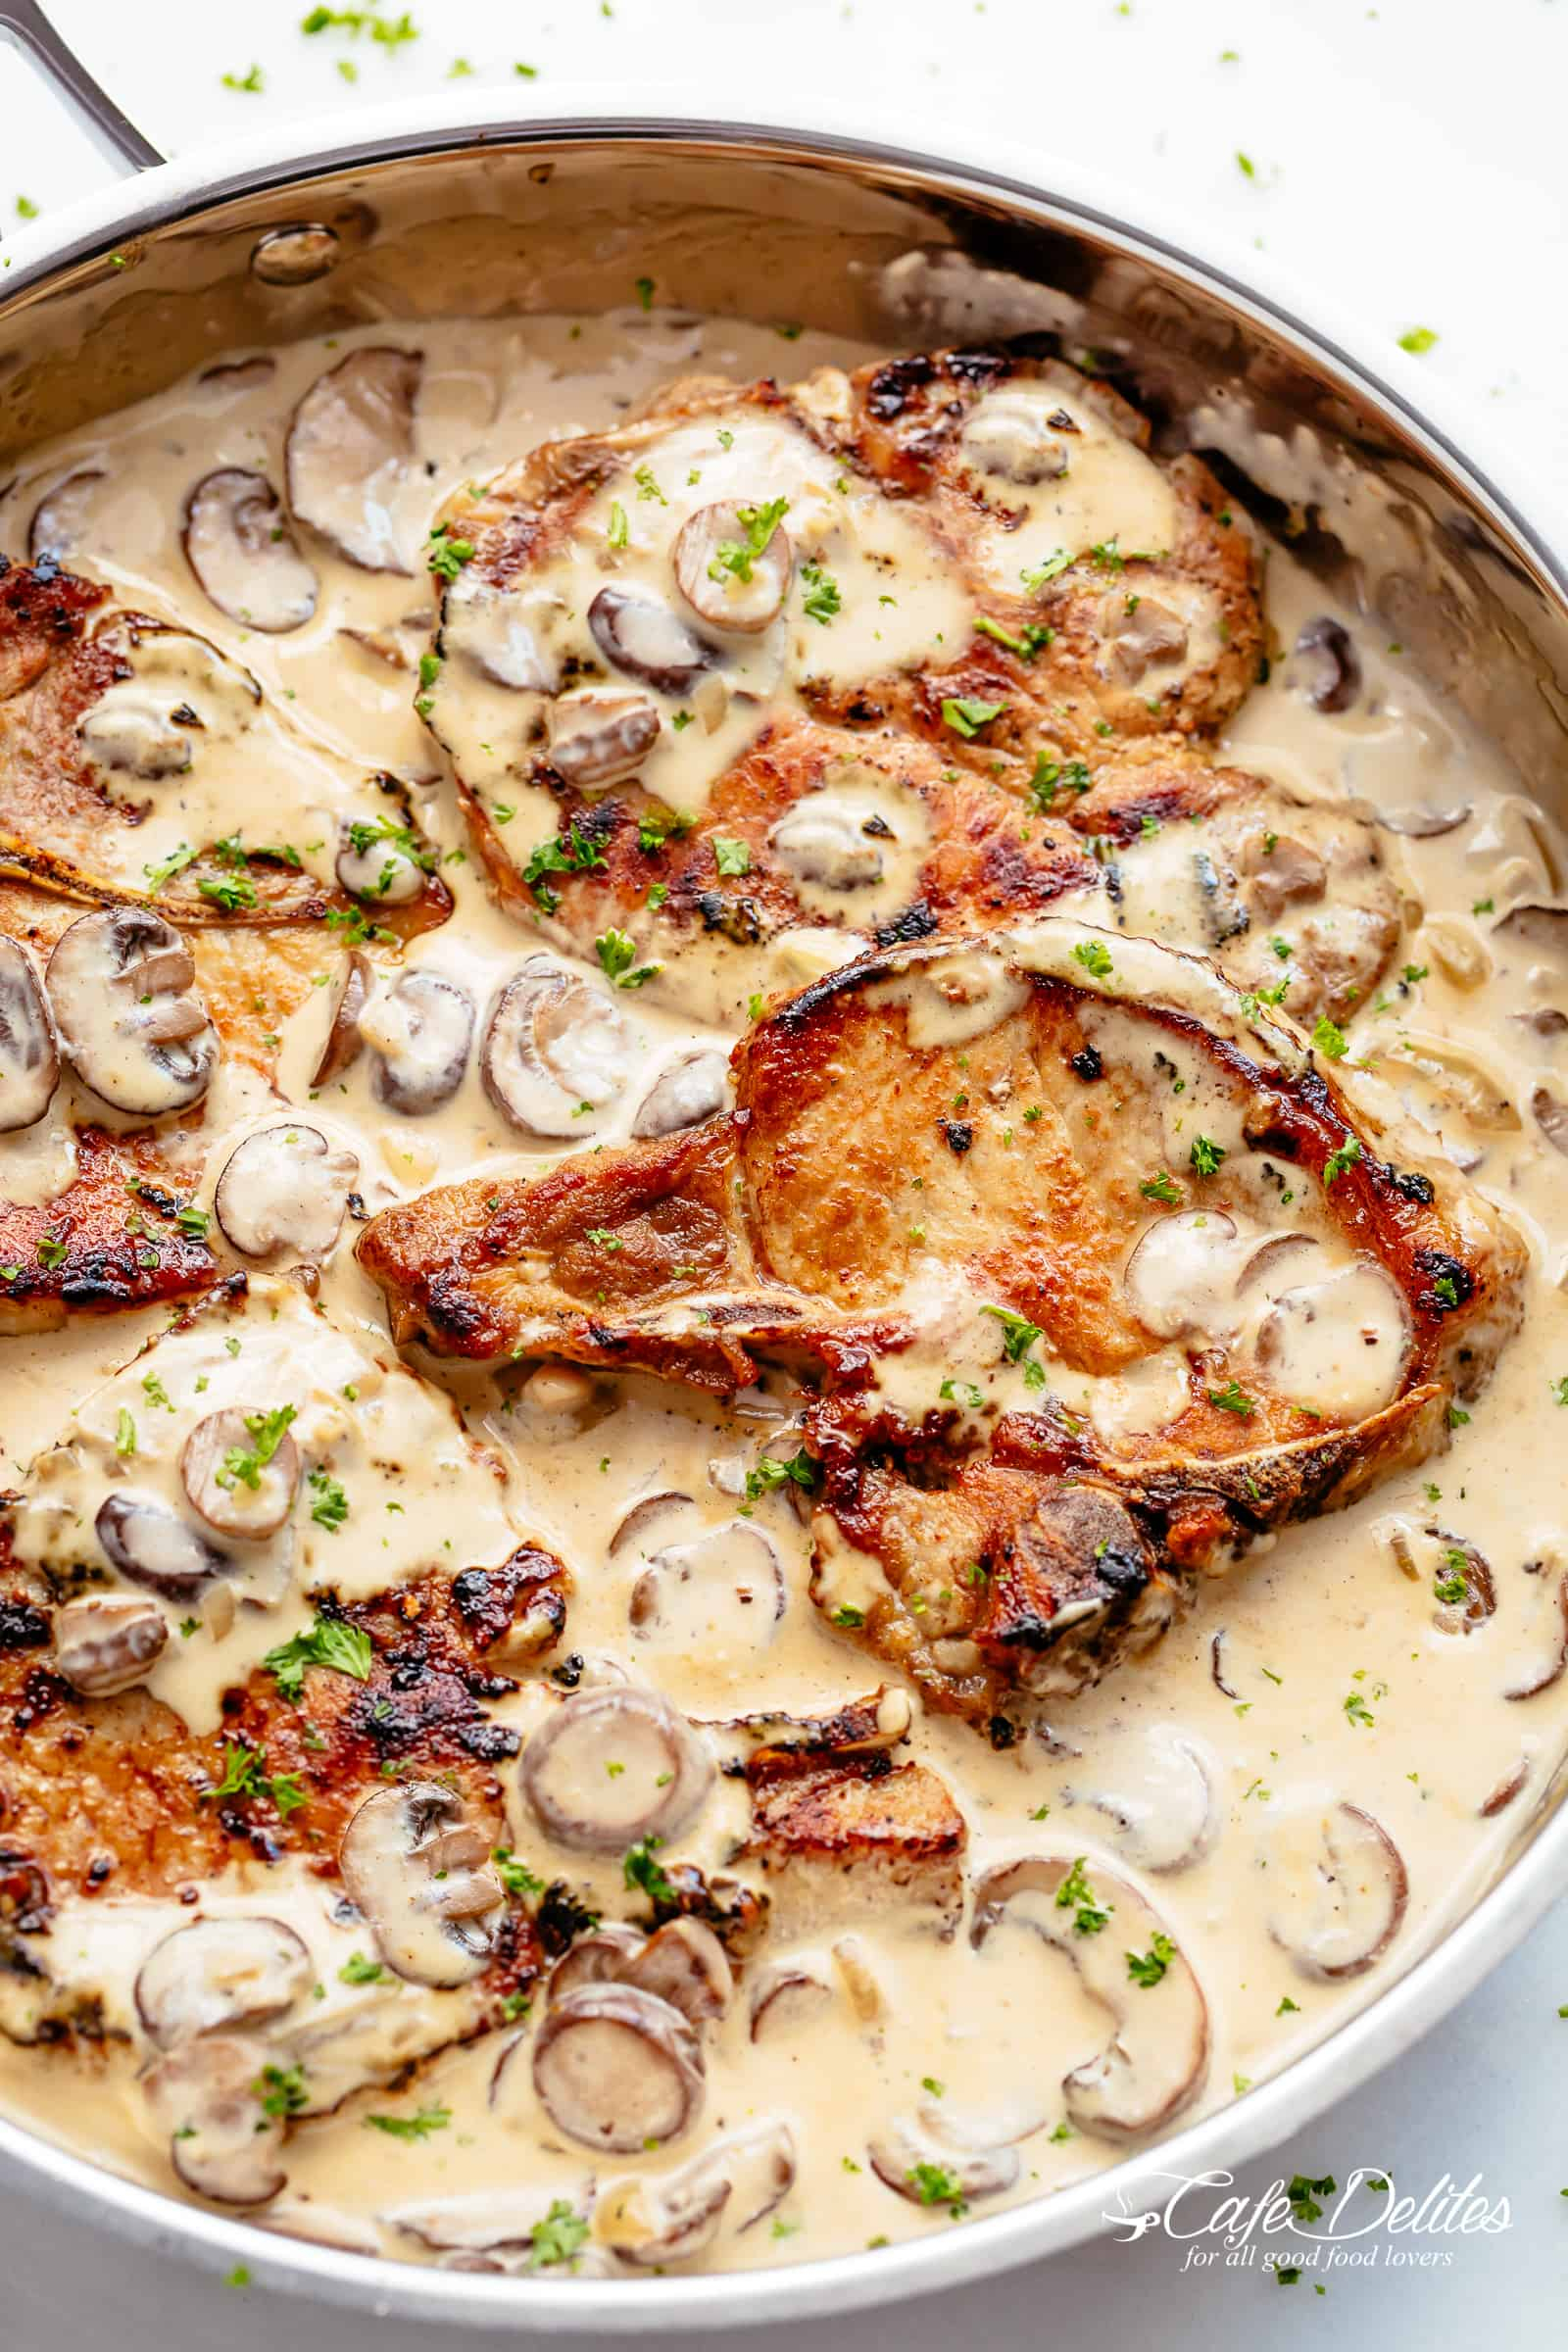 10 Amazing Ideas For Dinner With Pork Chops pork chops with creamy mushroom sauce cafe delites 2024